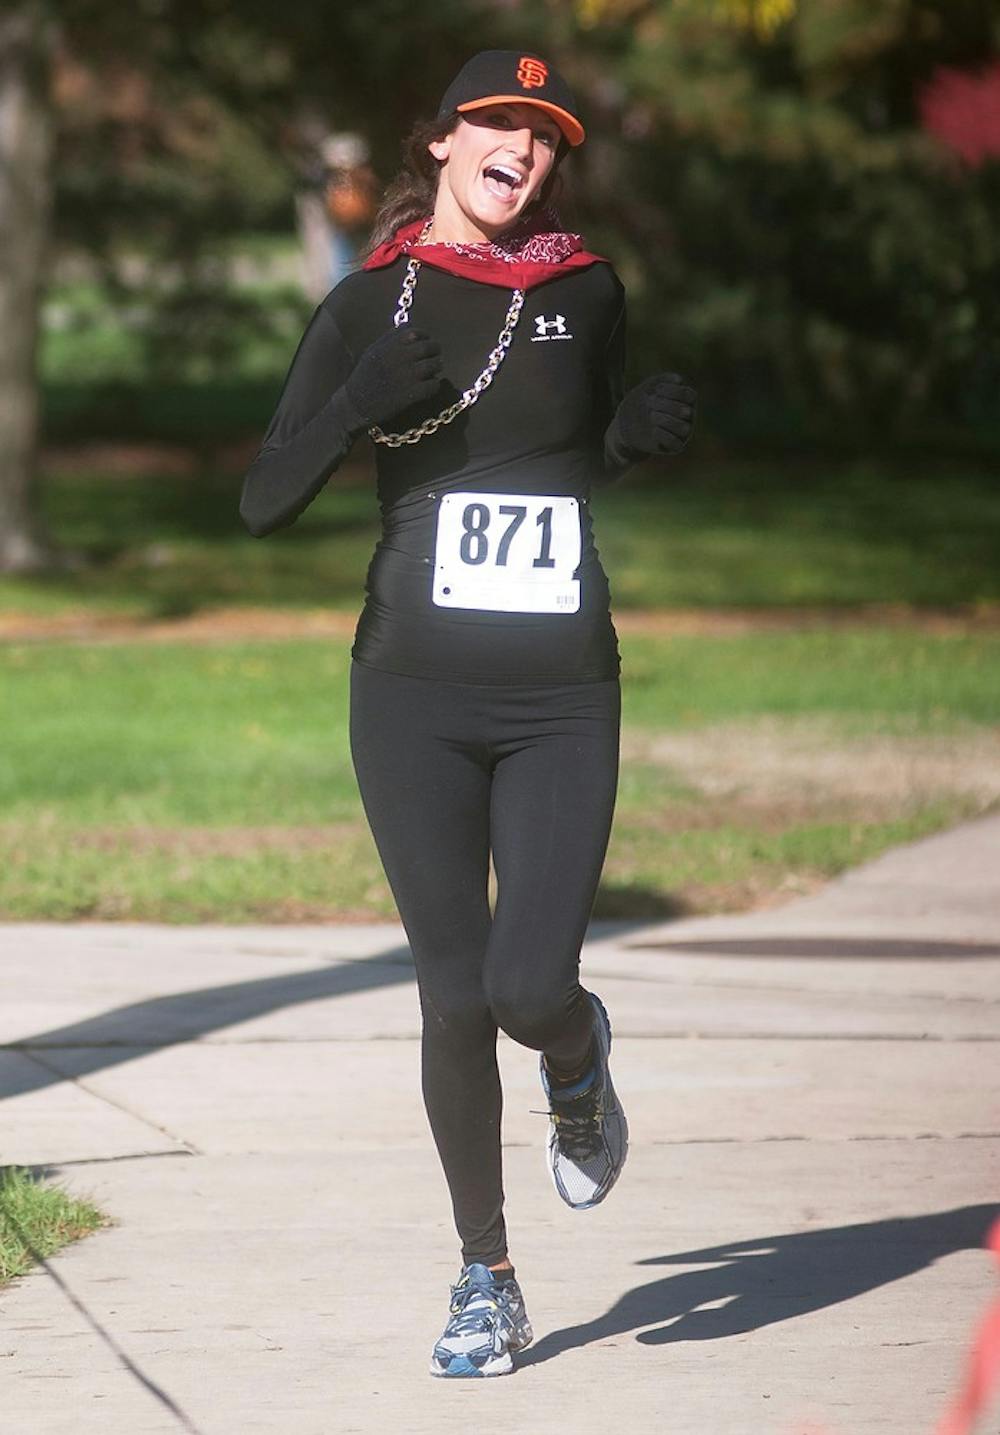 	<p>Graduate student Christina Giacomazzi runs toward the finish line on Nov. 3, 2013, by Fee Hall. The <span class="caps">MSU</span> Student Osteopaathic Medical Association organized a 5k to fundraise for St. Baldrick and Cassie Hines foundations. Georgina De Moya/ The State News</p>